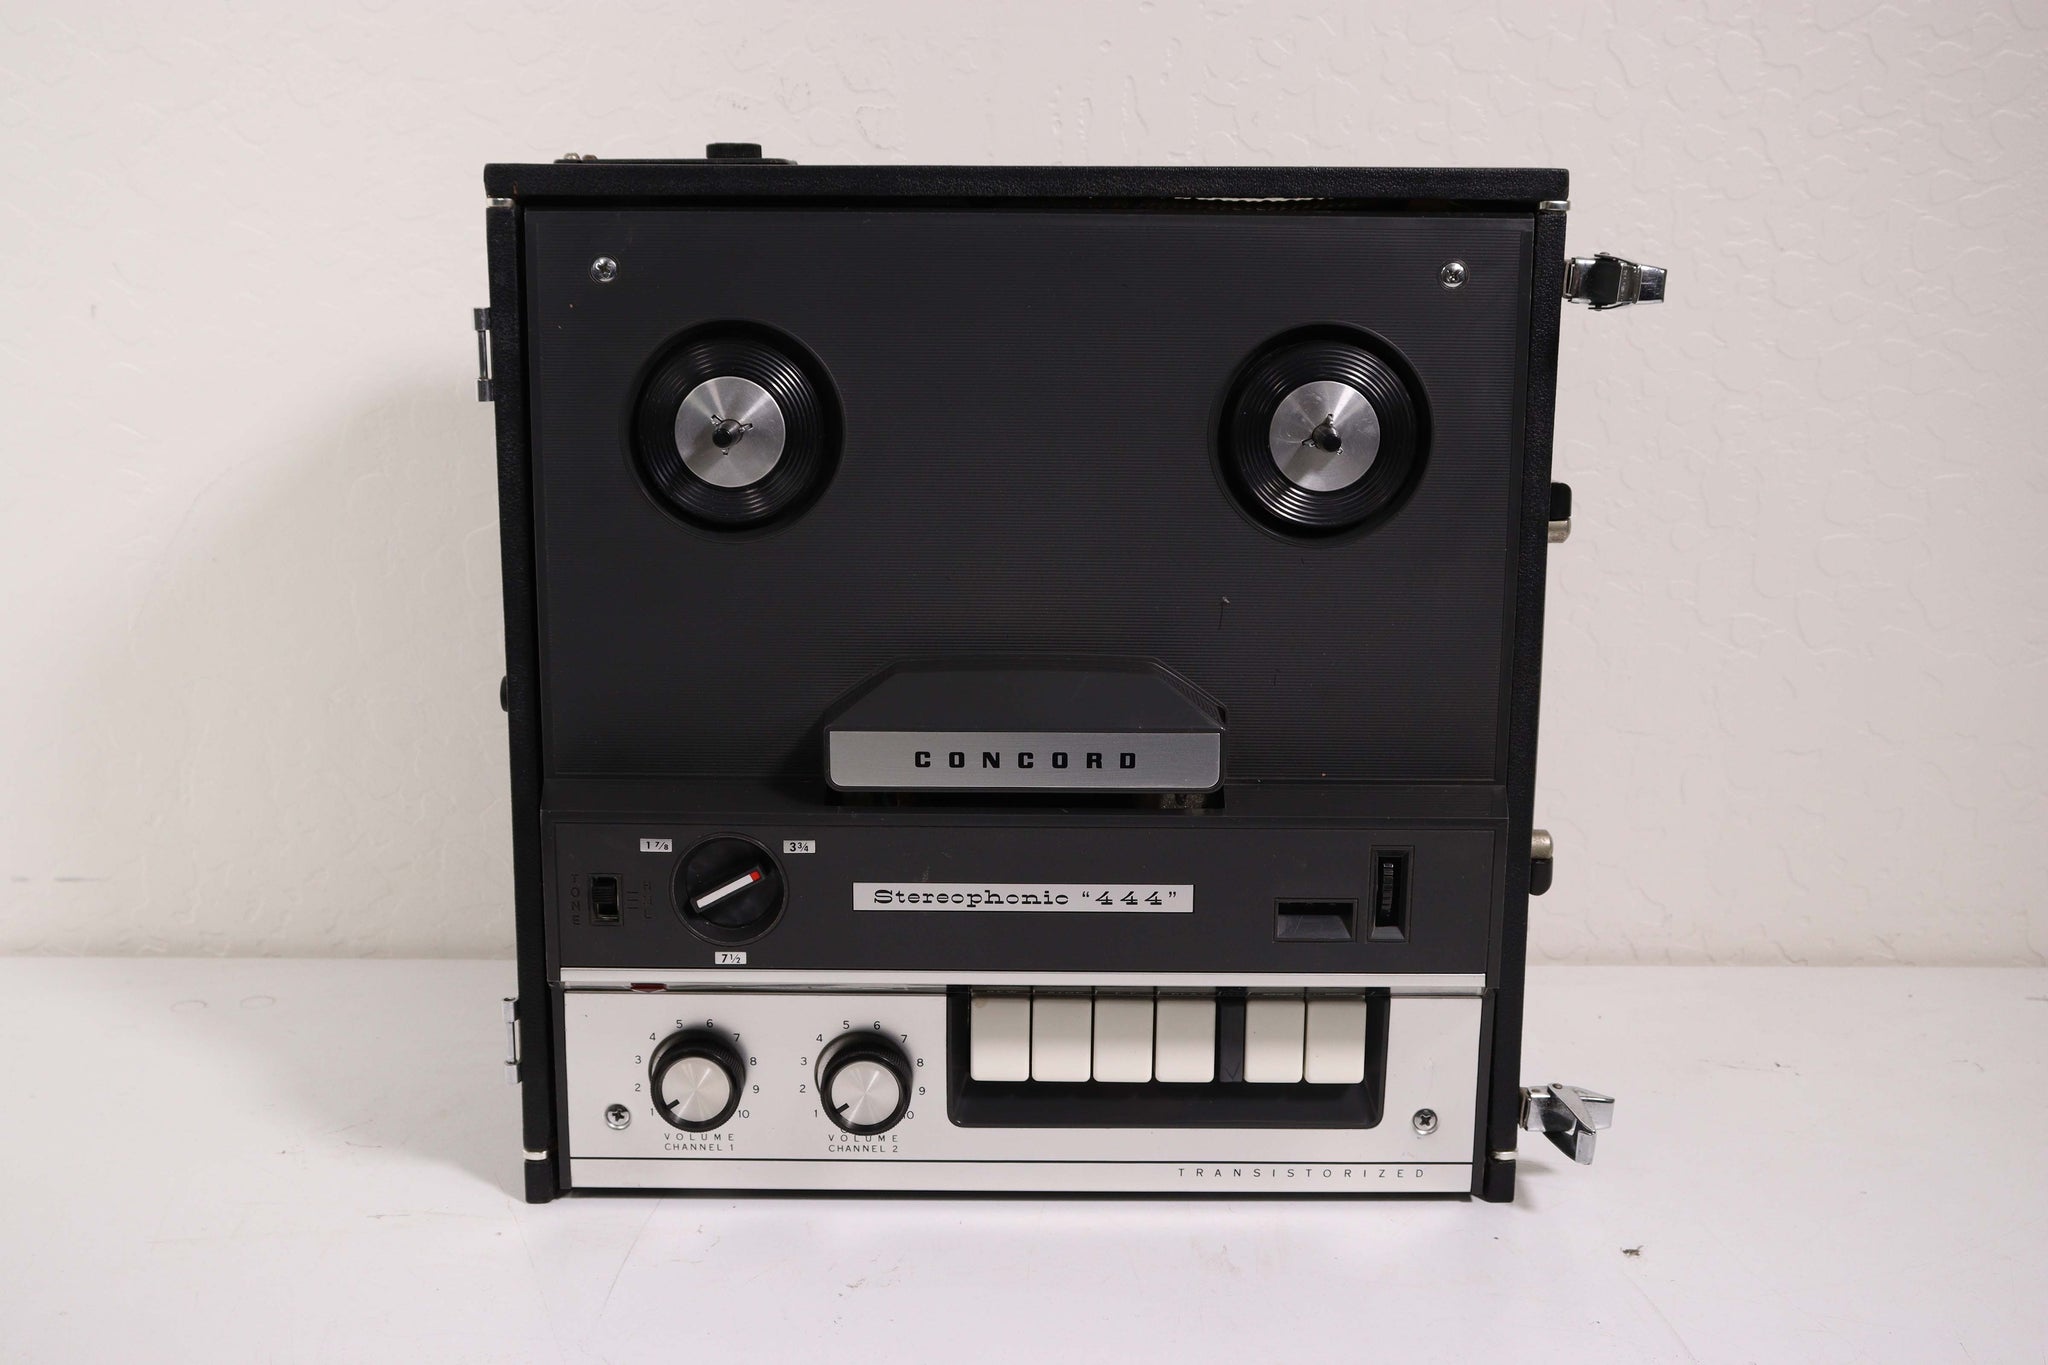 Concord Stereophonic 444 Transistorized Reel To Reel Tape Recorder Pla